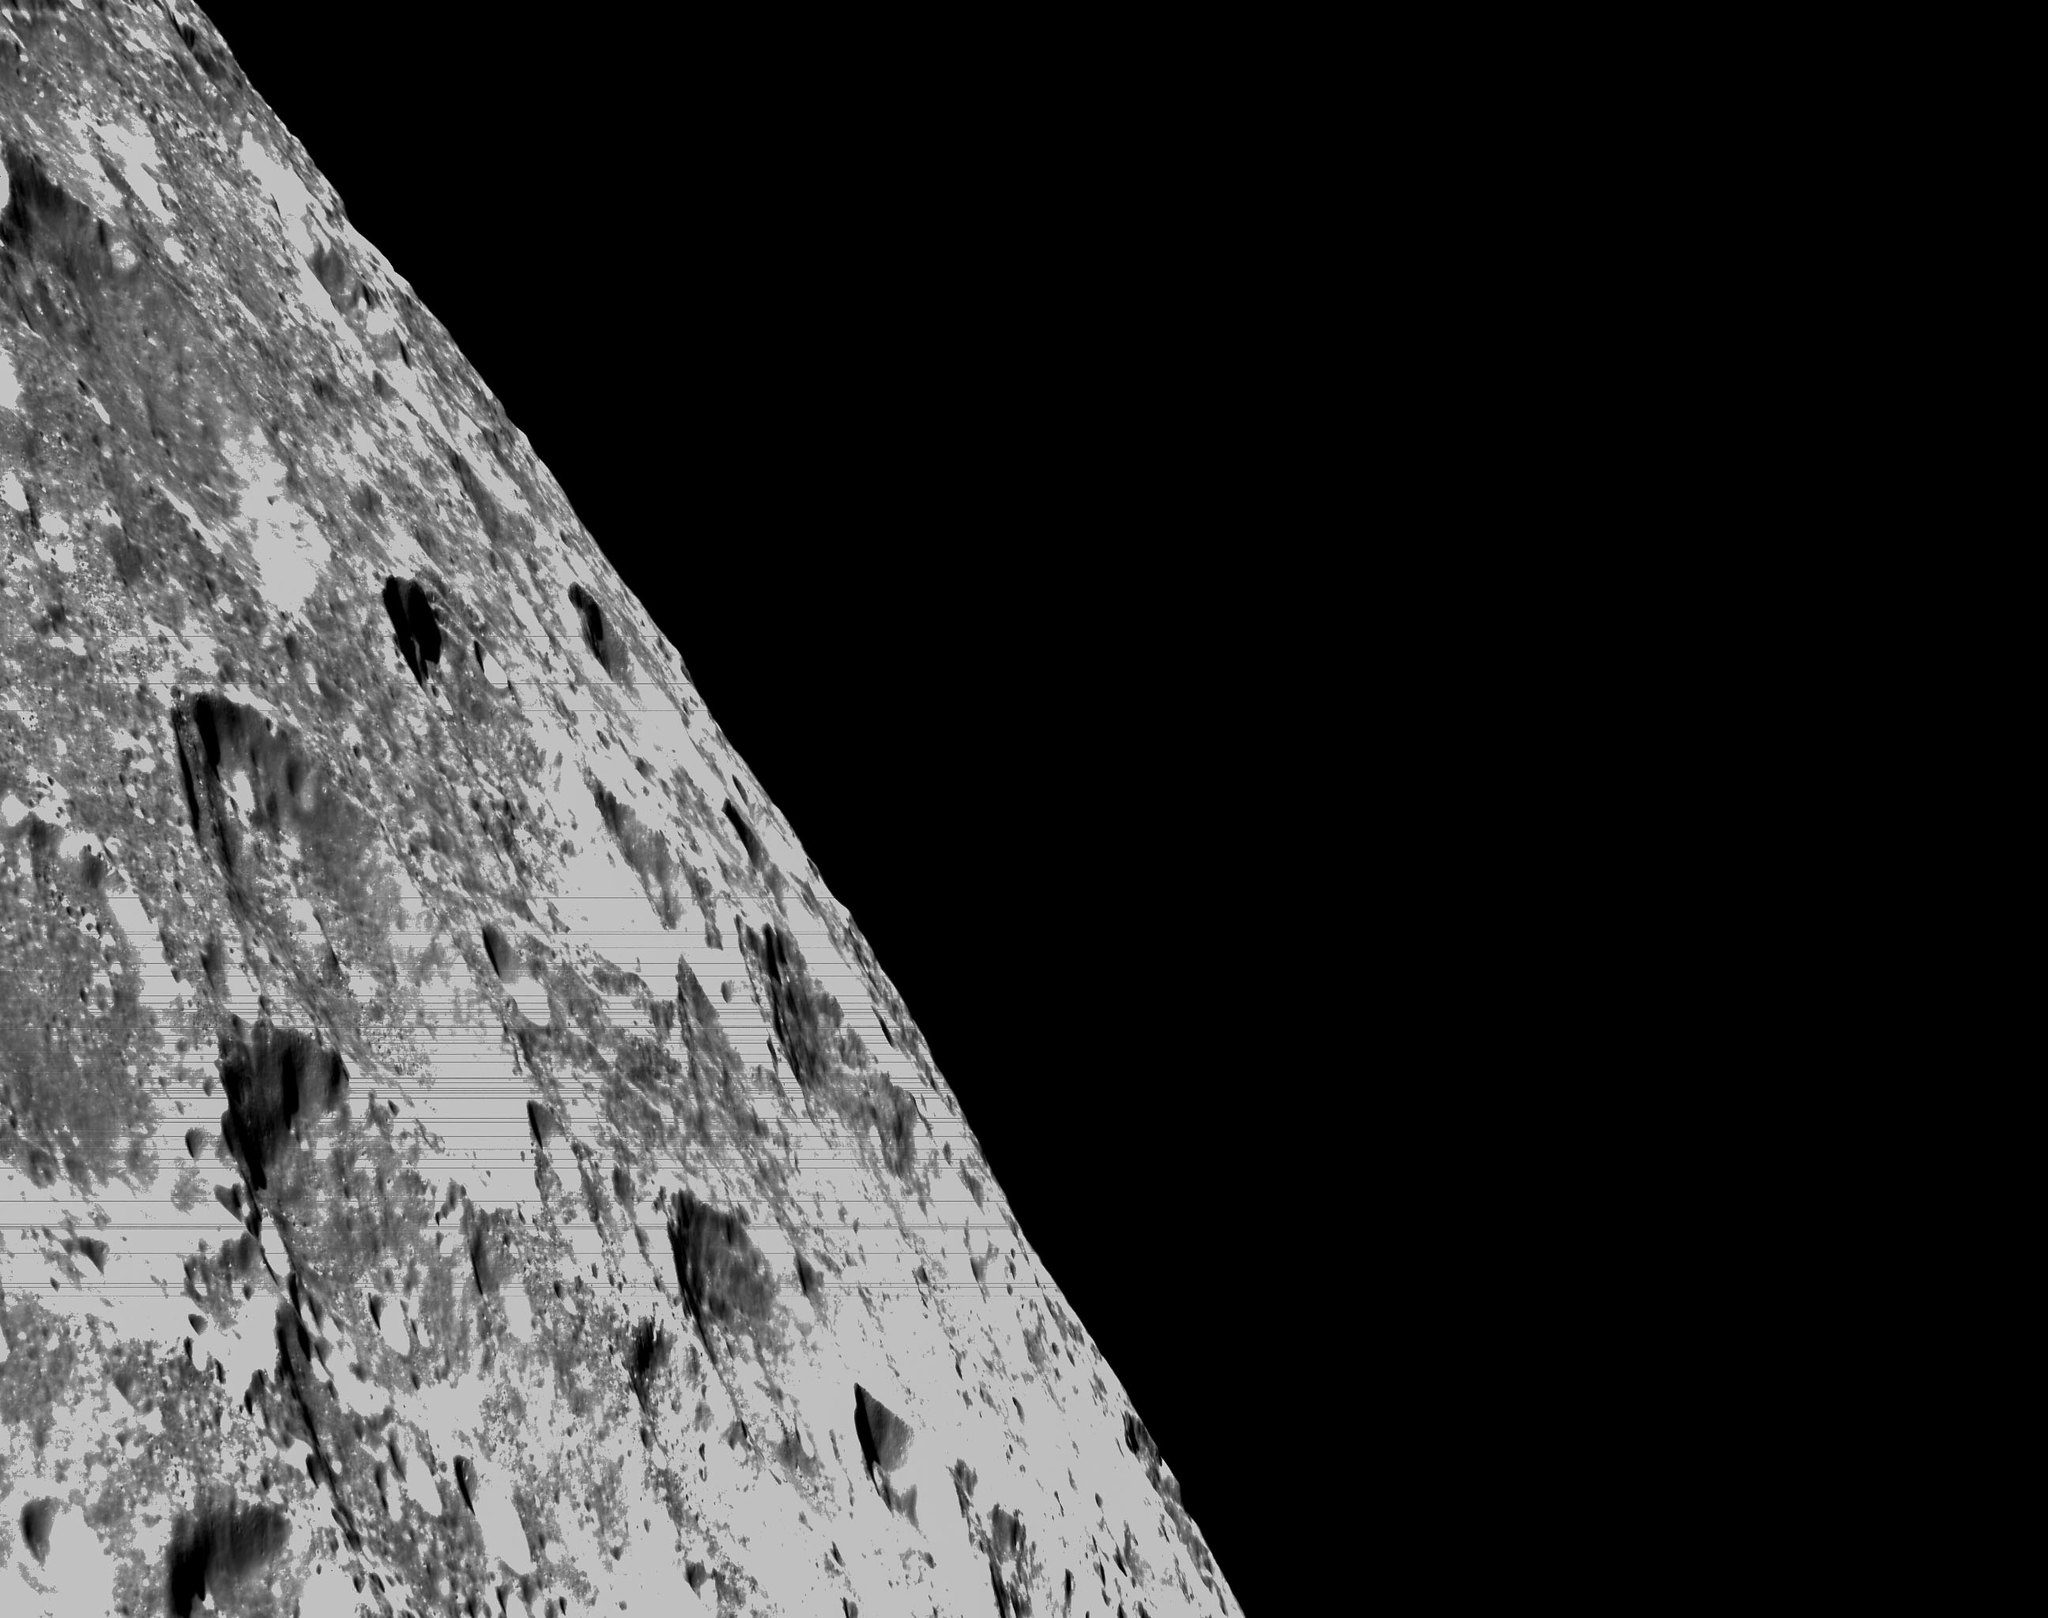 On the left hand side of the pictures the edge of the moon is visible with some deep craters clearly seen at an angle